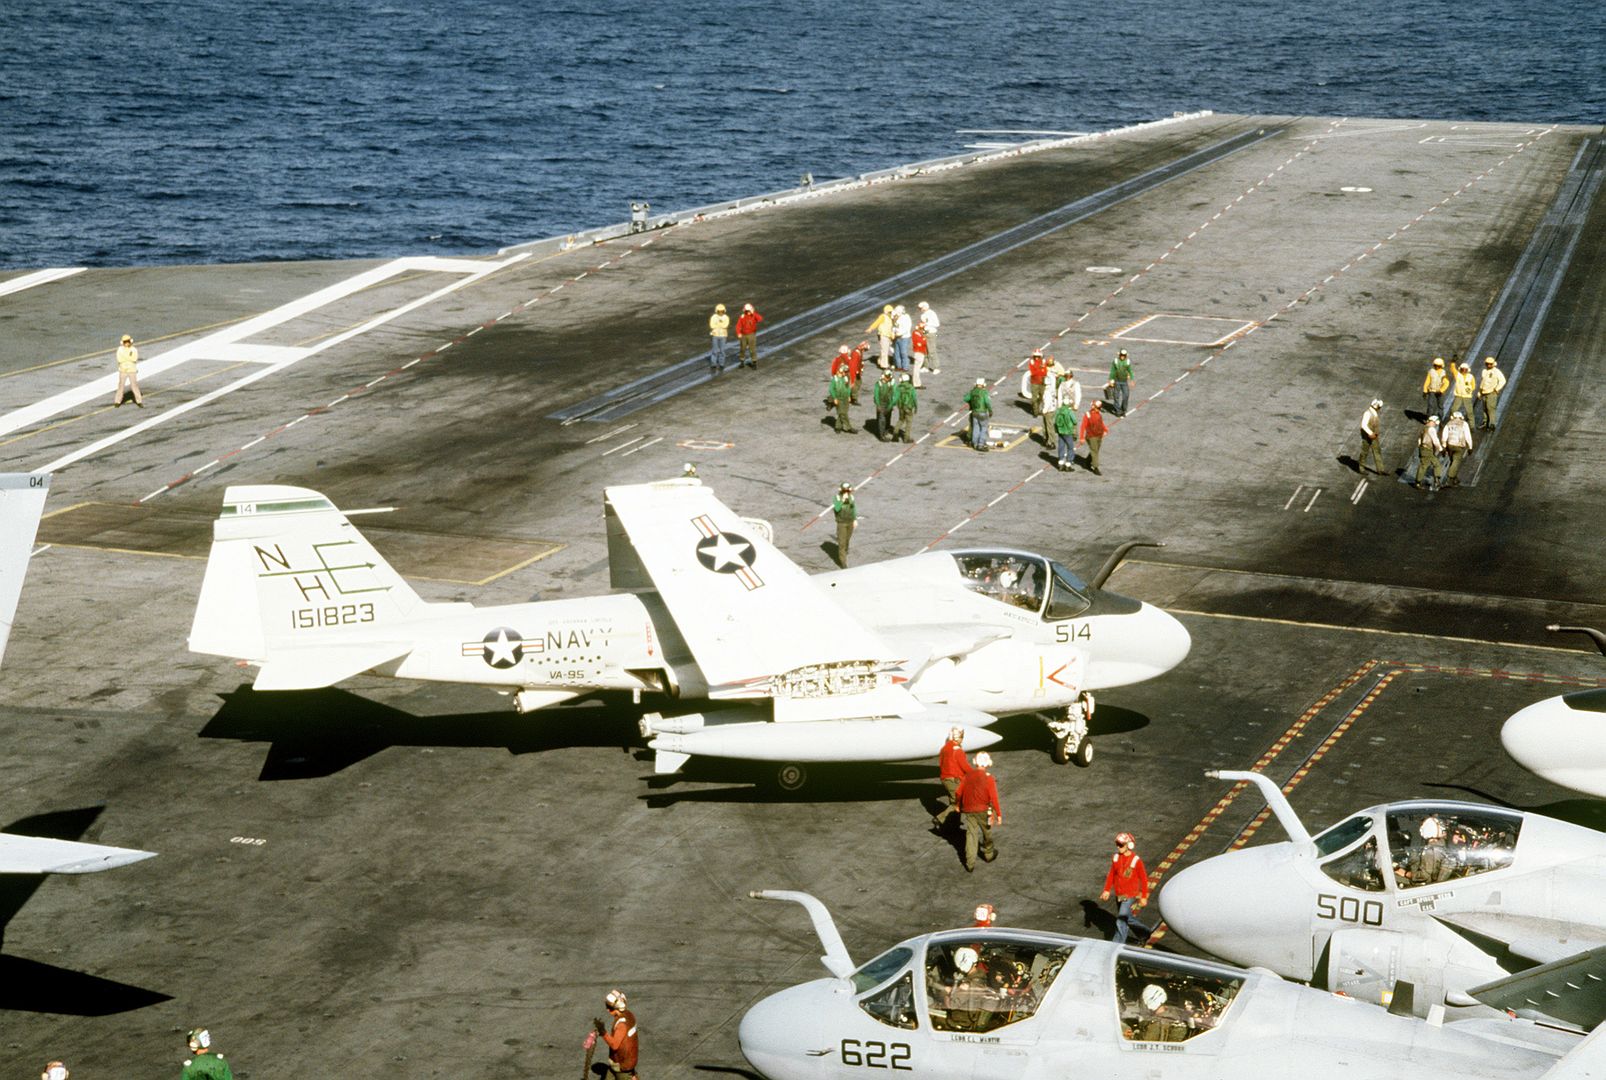 An Attack Squadron 95 KA 6D Intruder Aircraft Moves Into Launching Position On The Flight Deck Of The Nuclear Powered Aircraft Carrier USS ABRAHAM LINCOLN